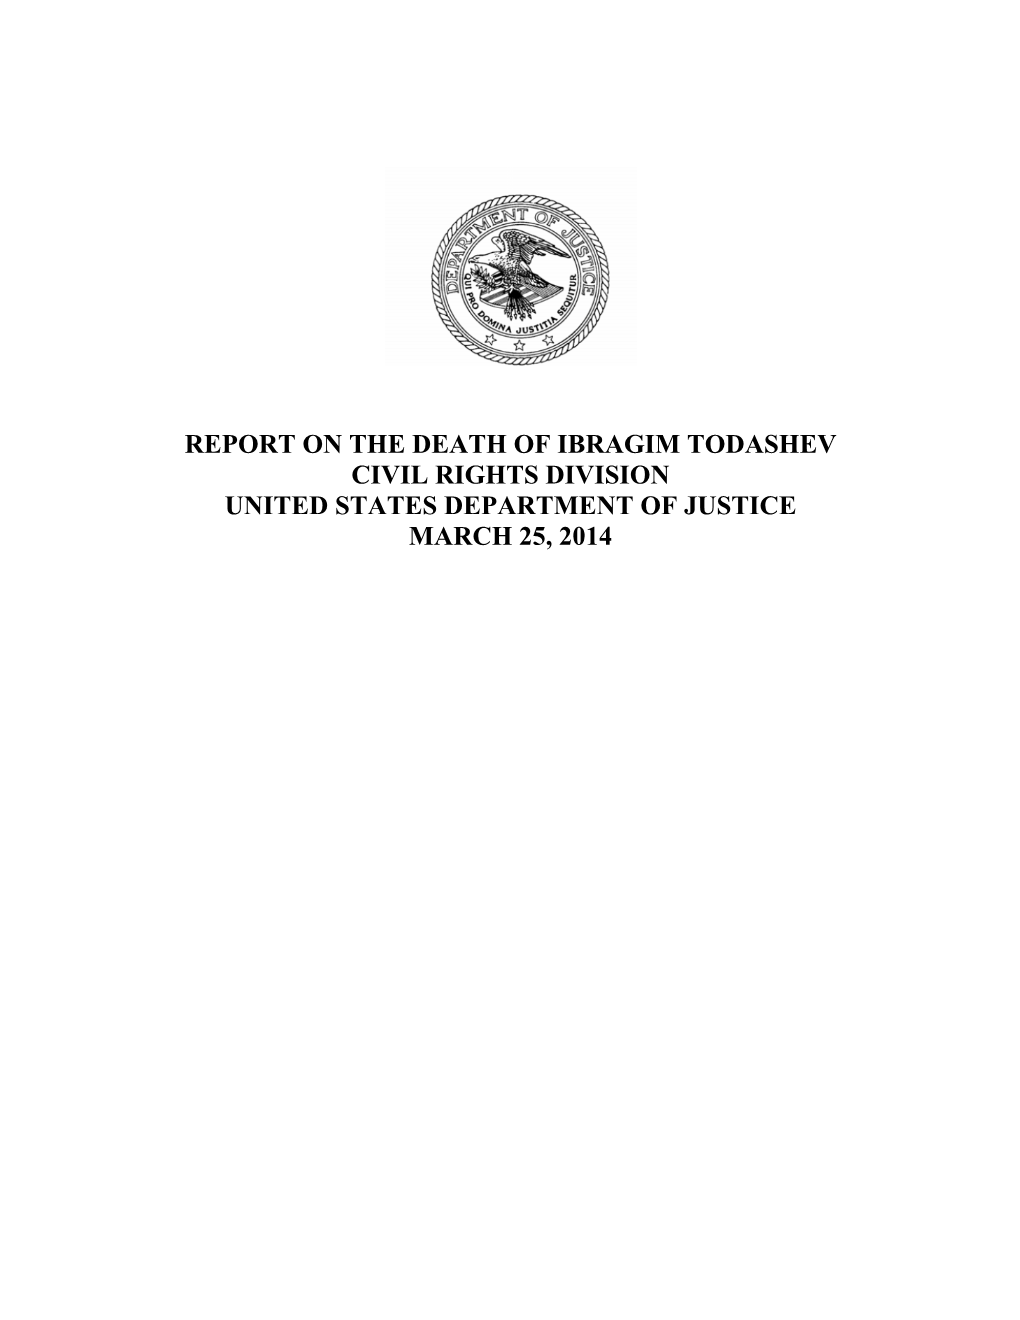 Report on the Death of Ibragim Todashev Civil Rights Division United States Department of Justice March 25, 2014